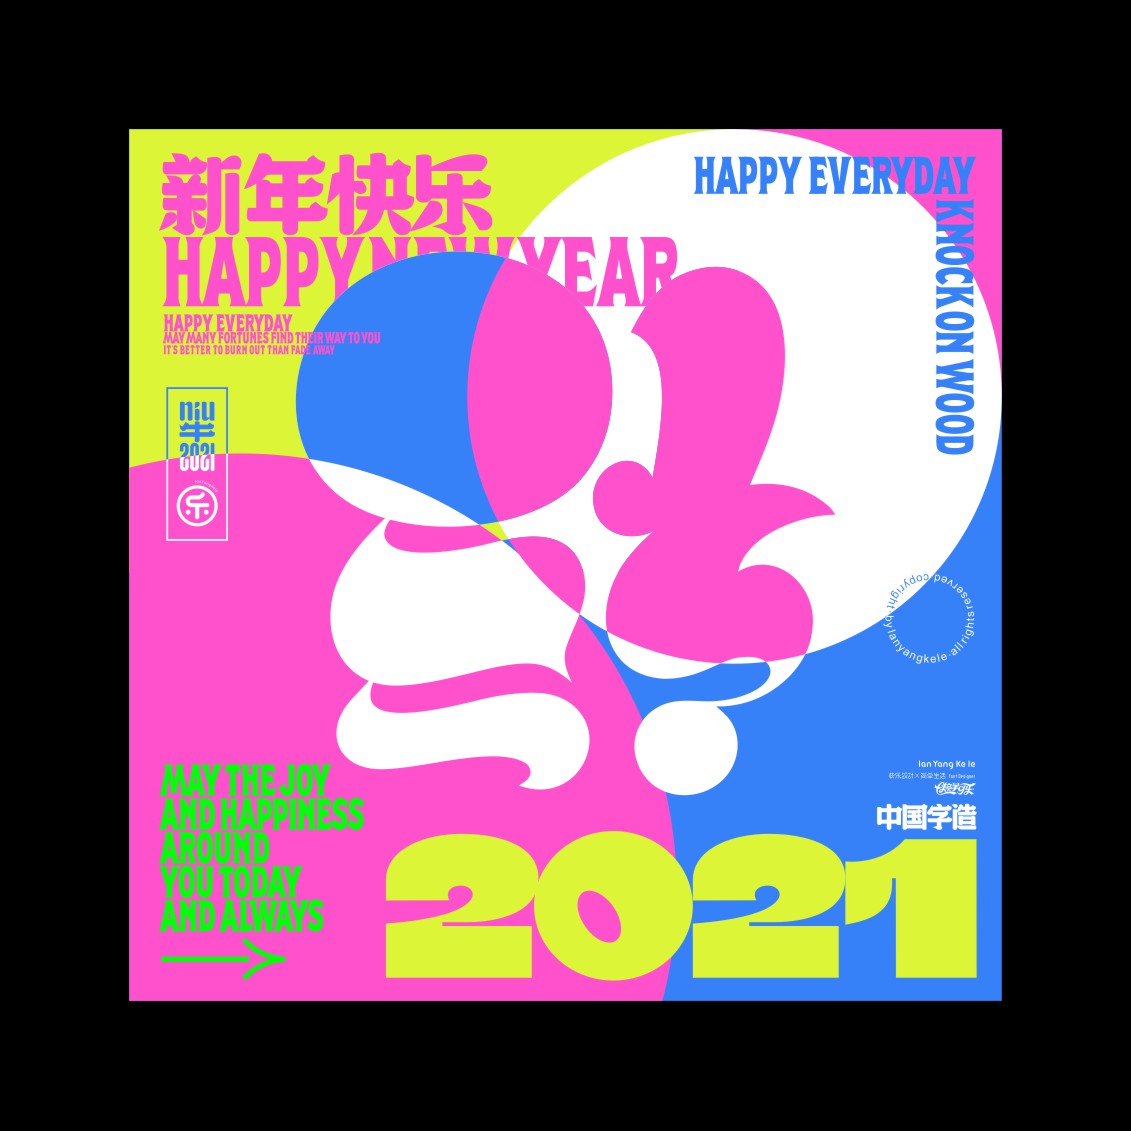 A group of New Year's greetings In 2021